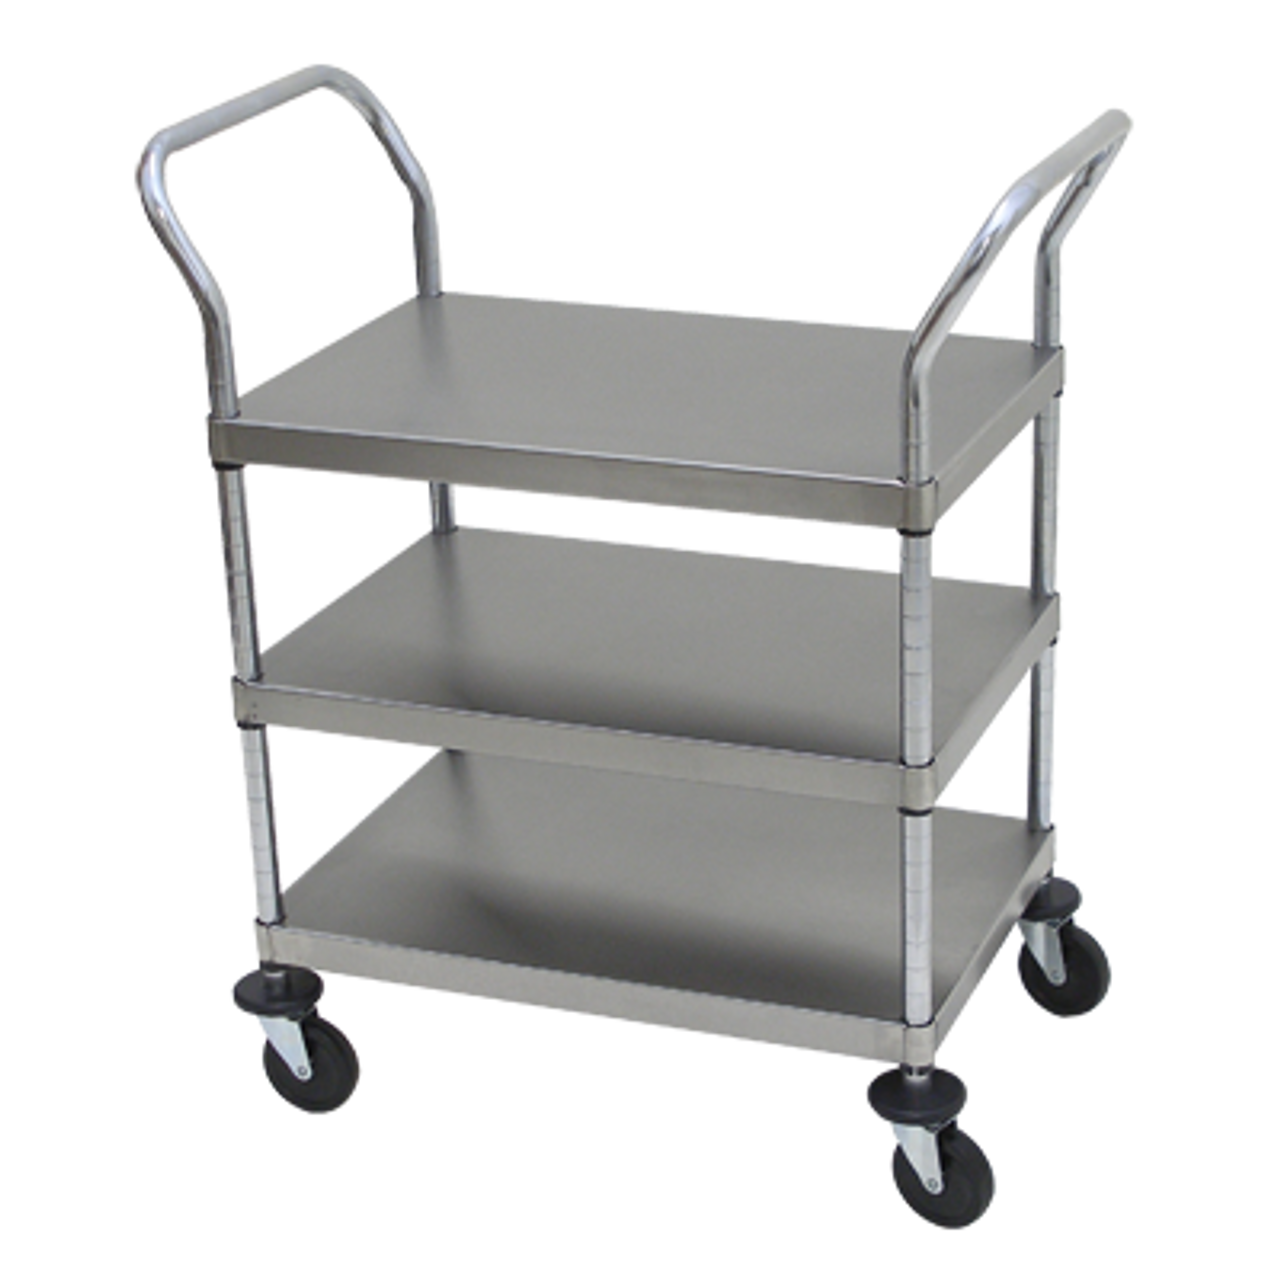 Utility Cart, open design, three shelves, shelf size approximately 24" x 33", tubular stainless steel frame, with casters